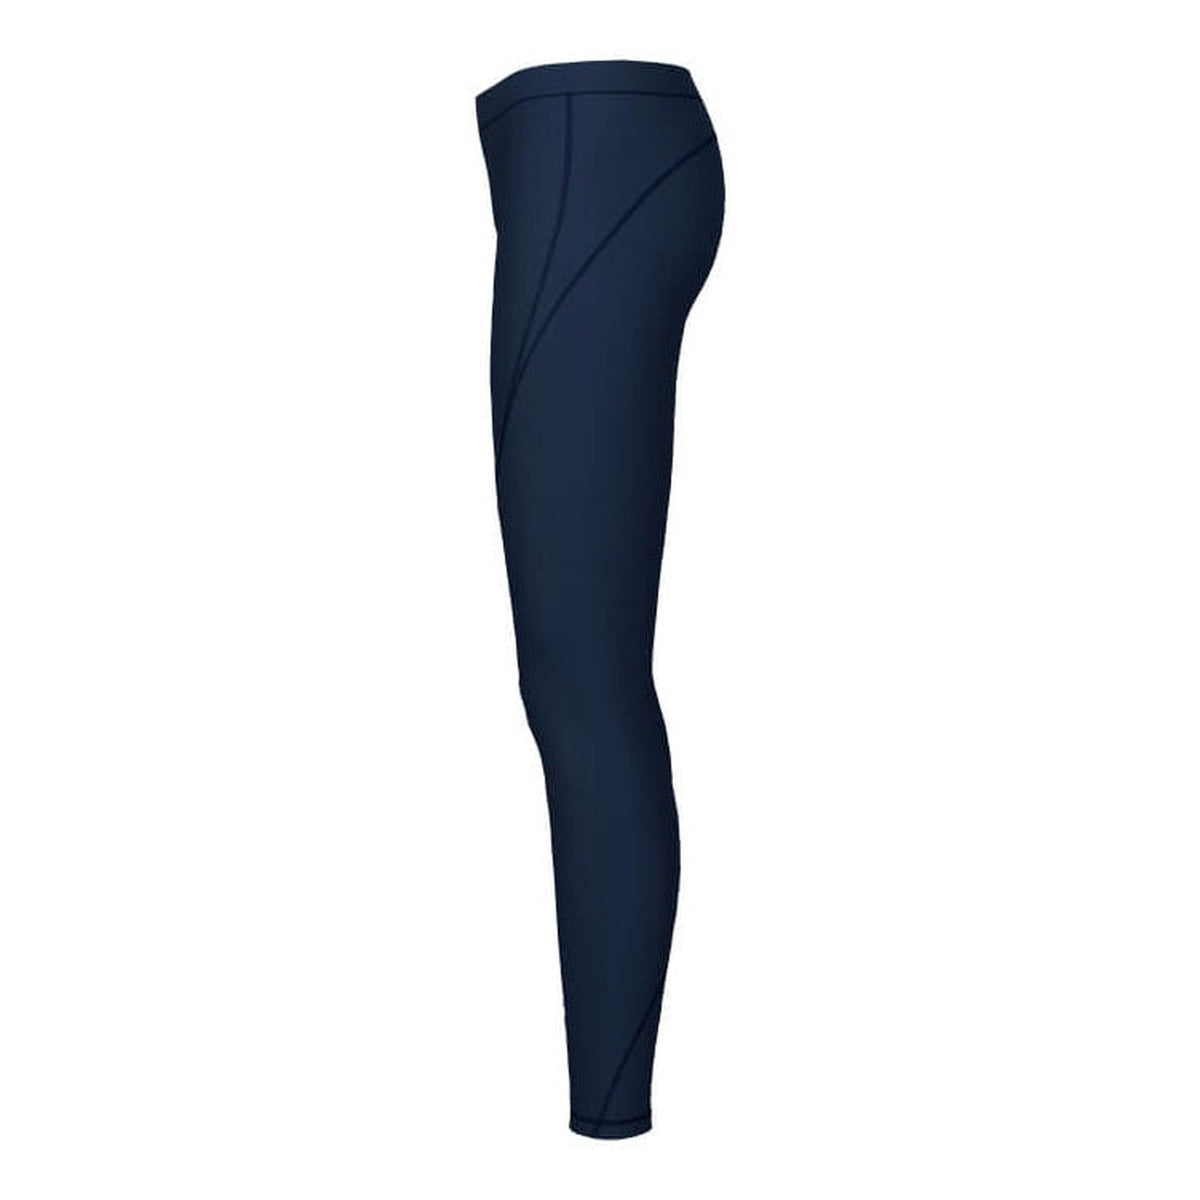 Alford Otters ASC - 'Lutra' Power Stretch Leggings Ladies